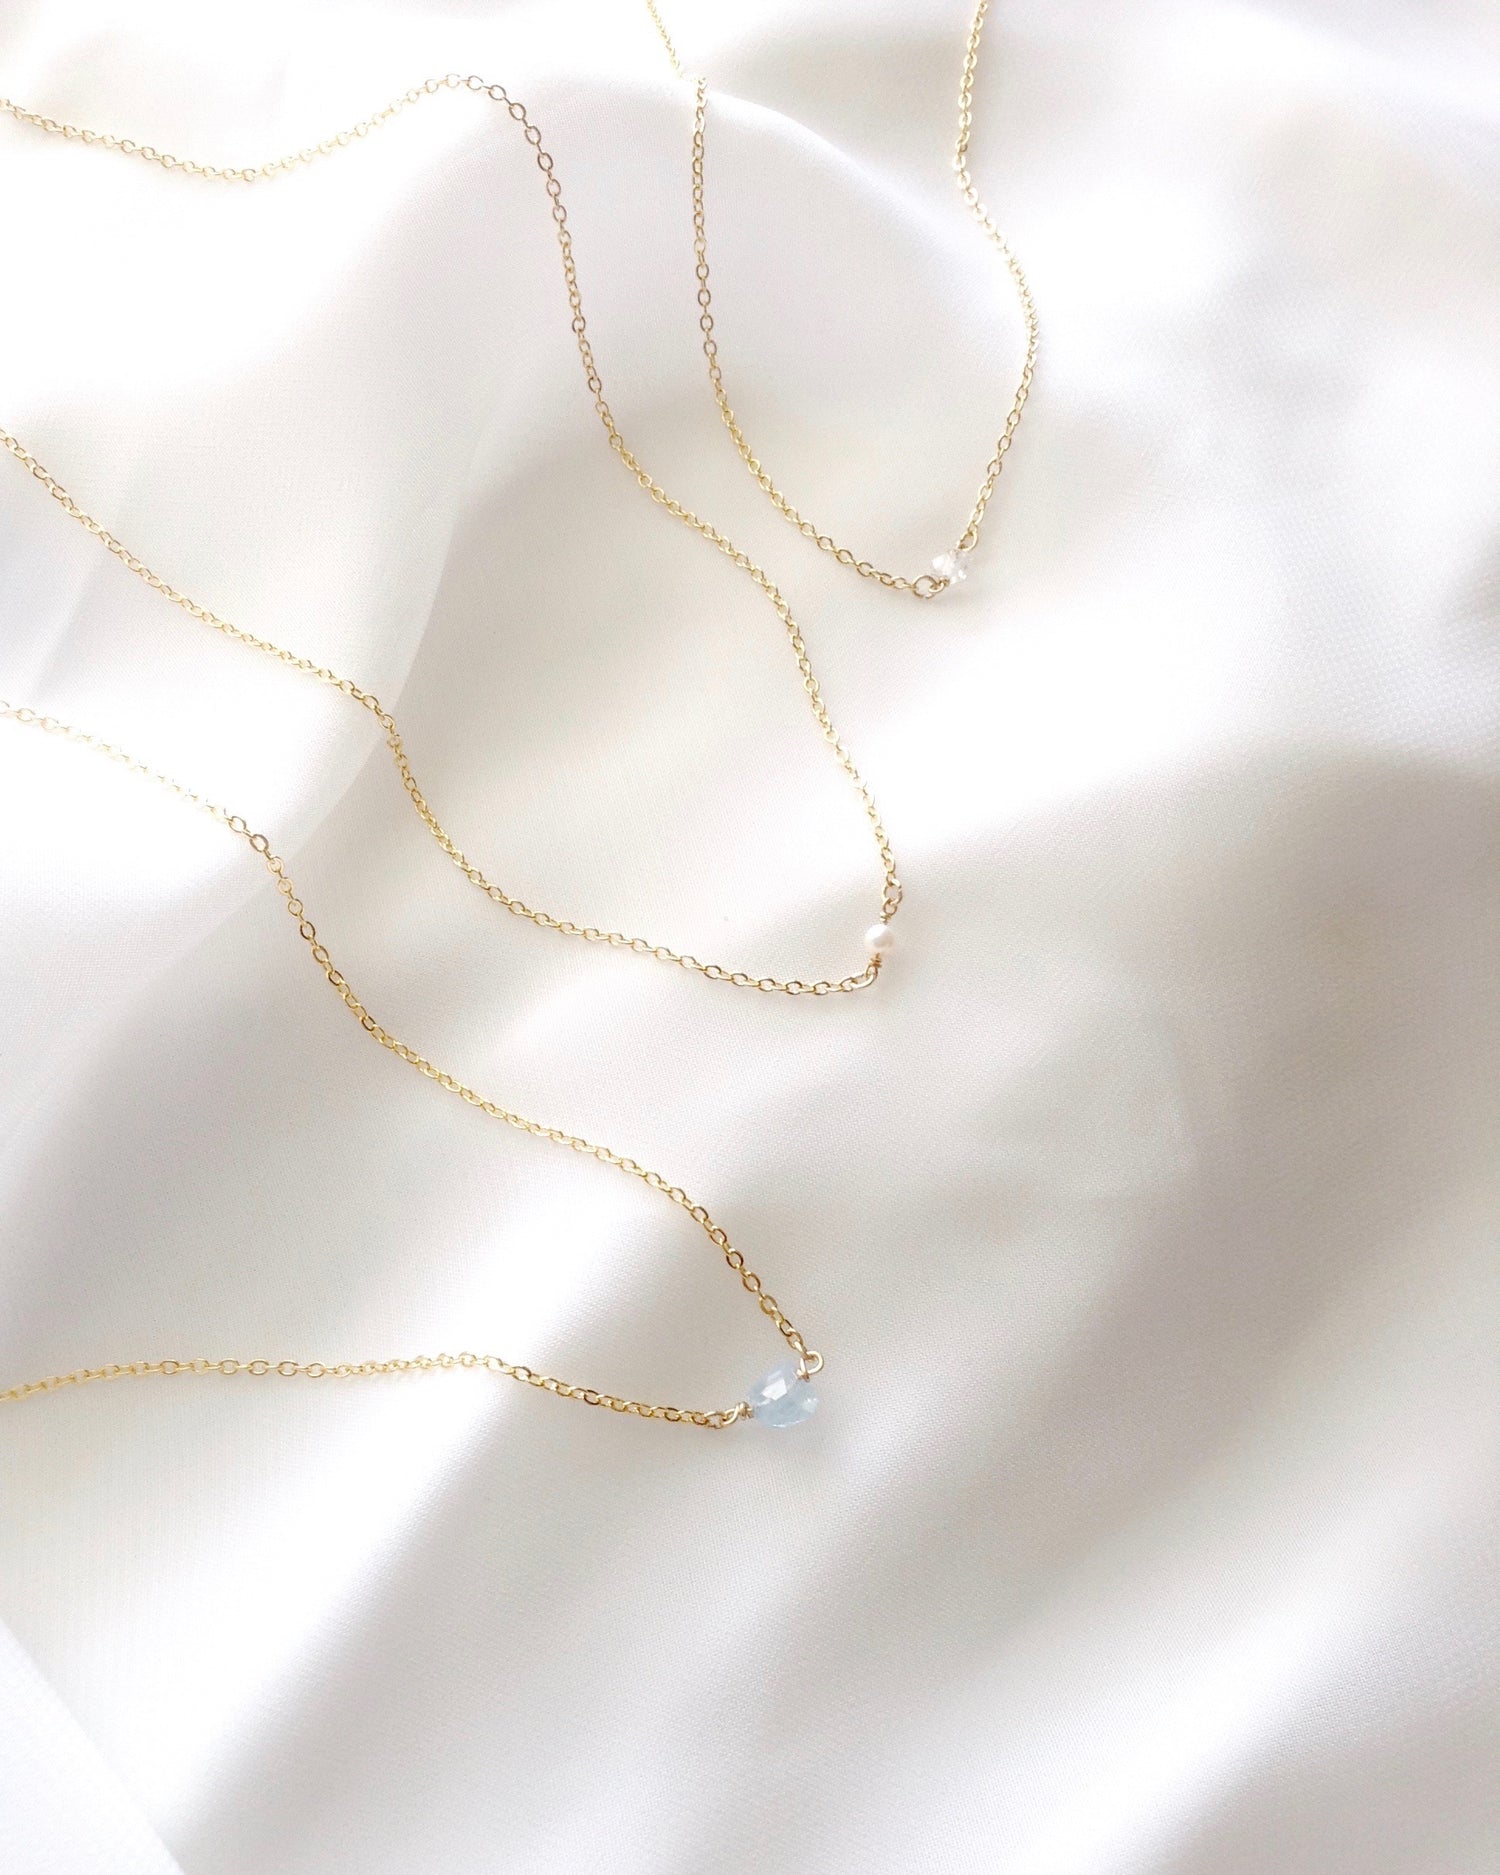 Affordable Delicate Everyday Layering Jewelry | IB Jewelry